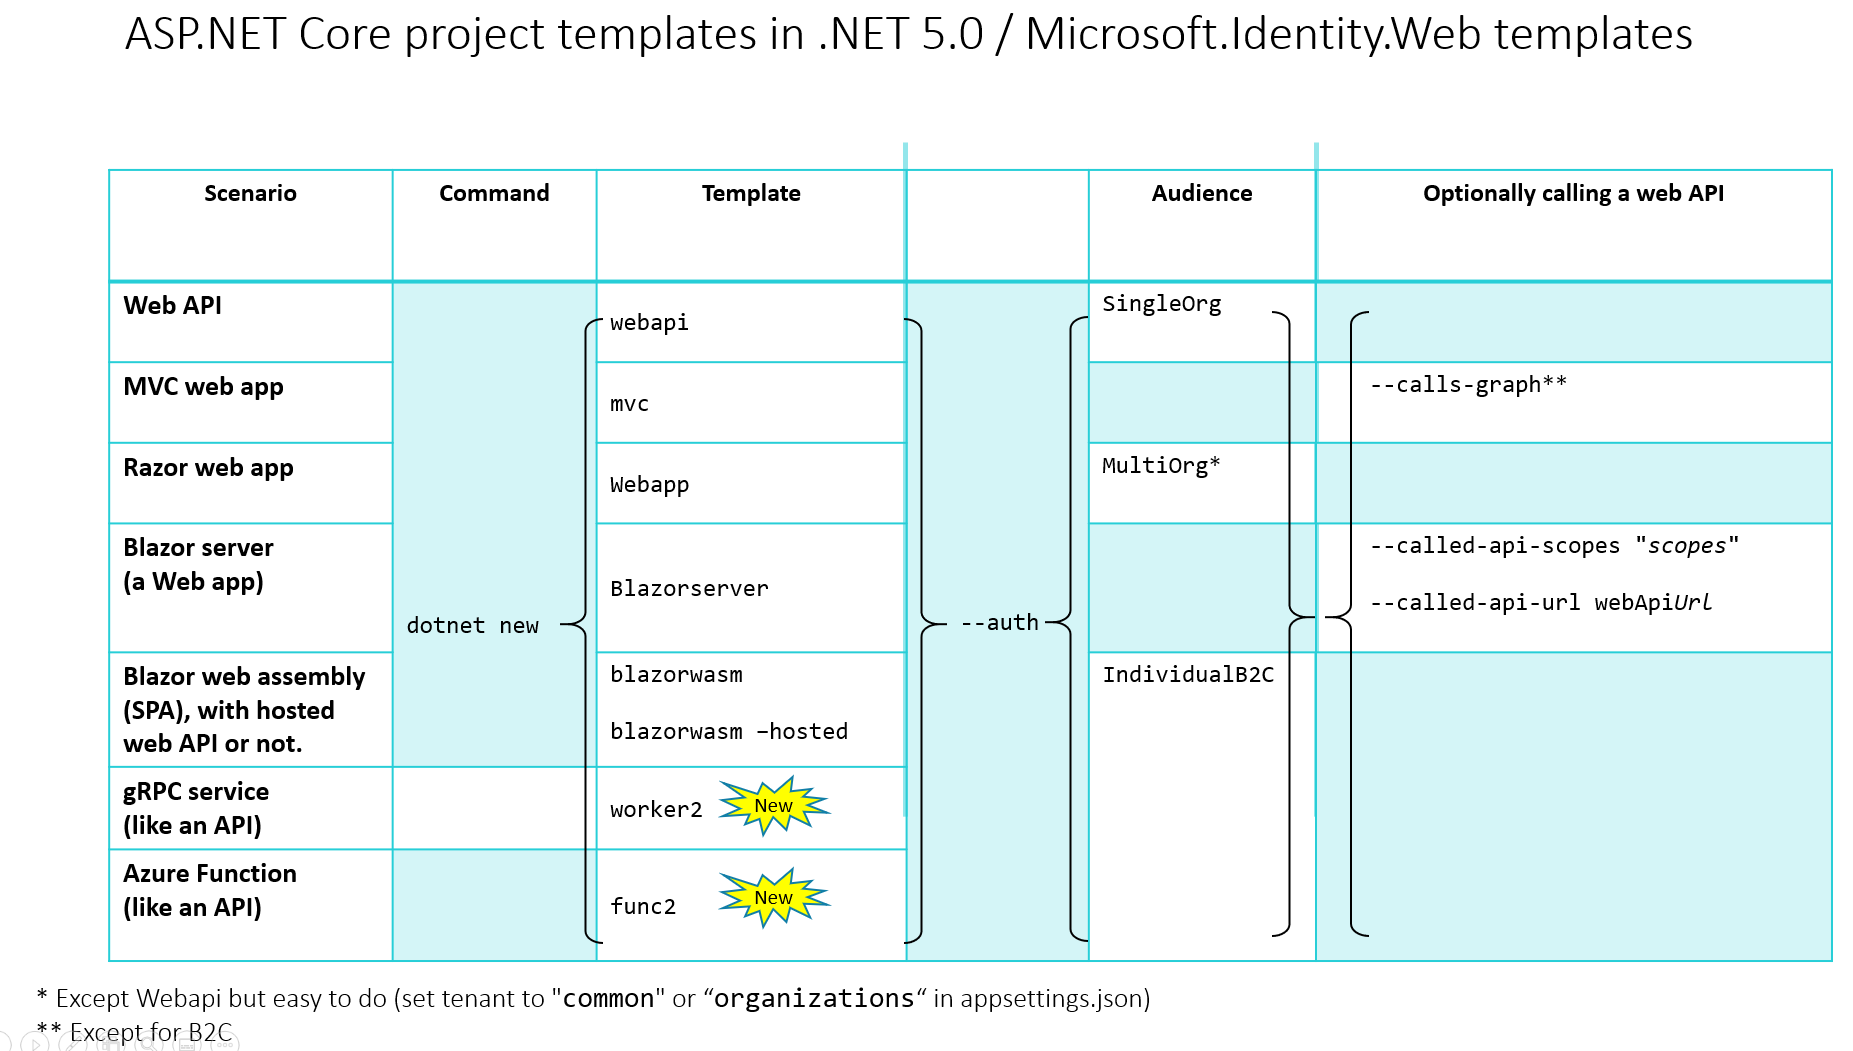 Image showing ASP.NET Core projects templates for building web apps